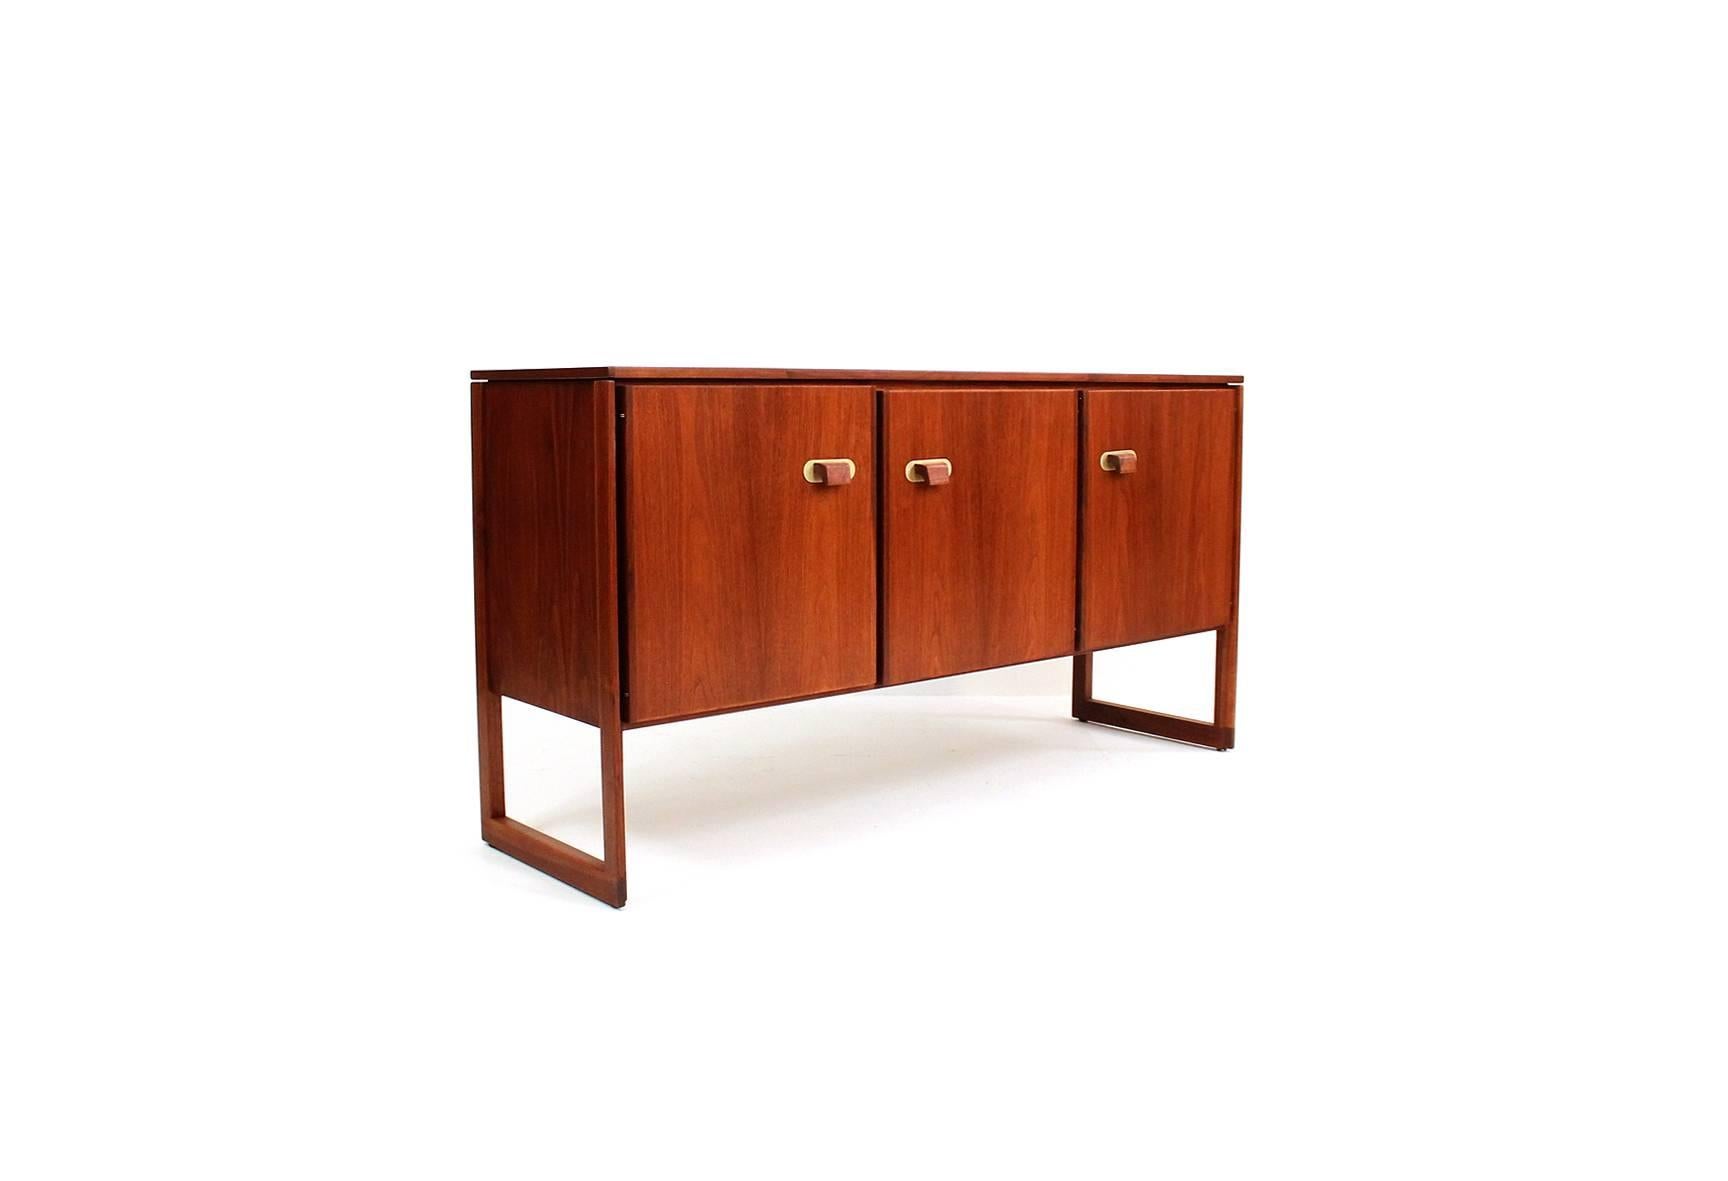 Walnut credenza or cabinet designed by Jens Risom. Cabinet features sculptural solid walnut and brass pulls concealing three compartments with adjustable shelves.